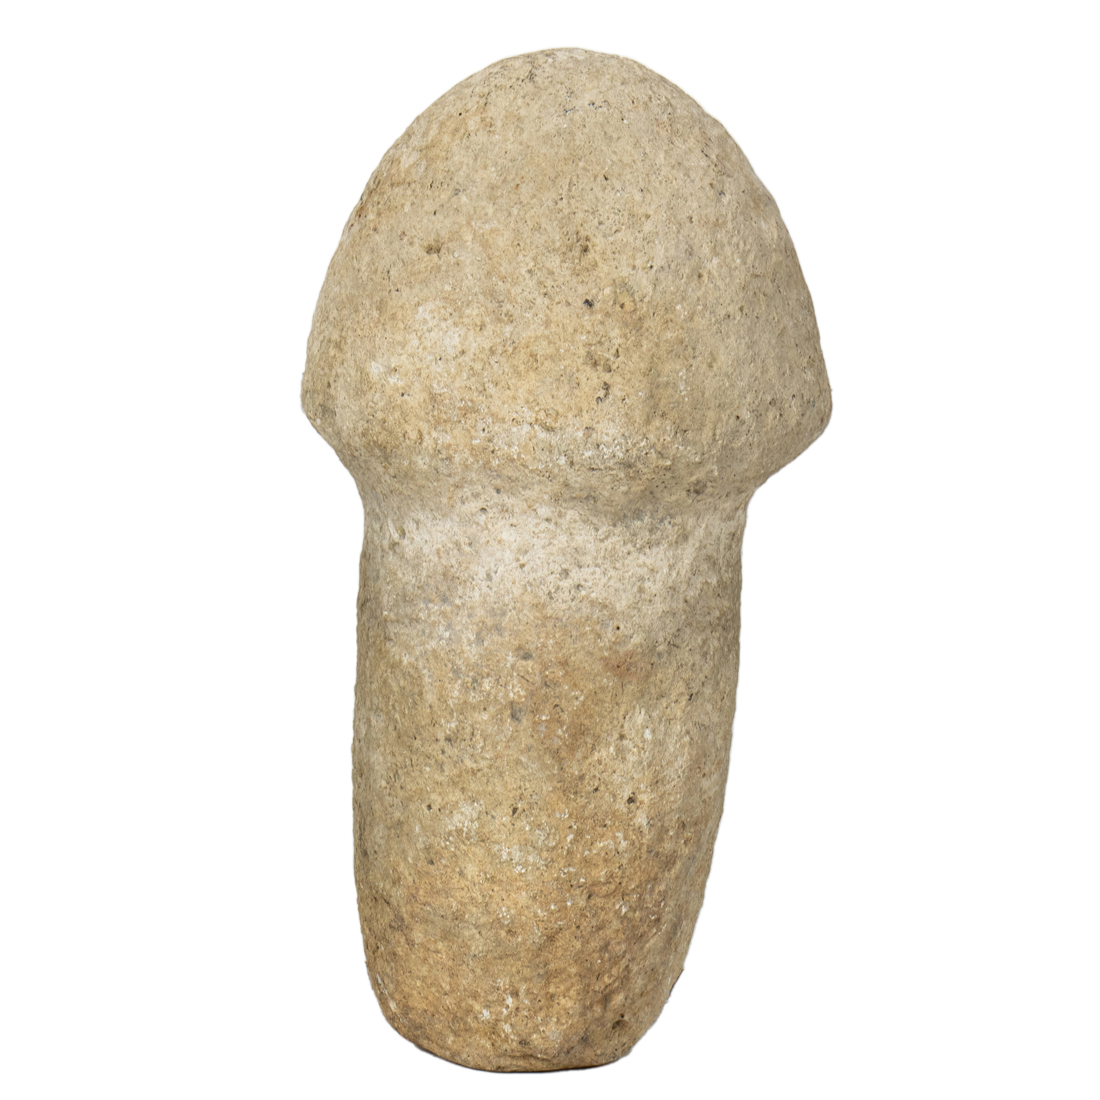 INDONESIAN CARVED PHALLIC STONE 3a0d56